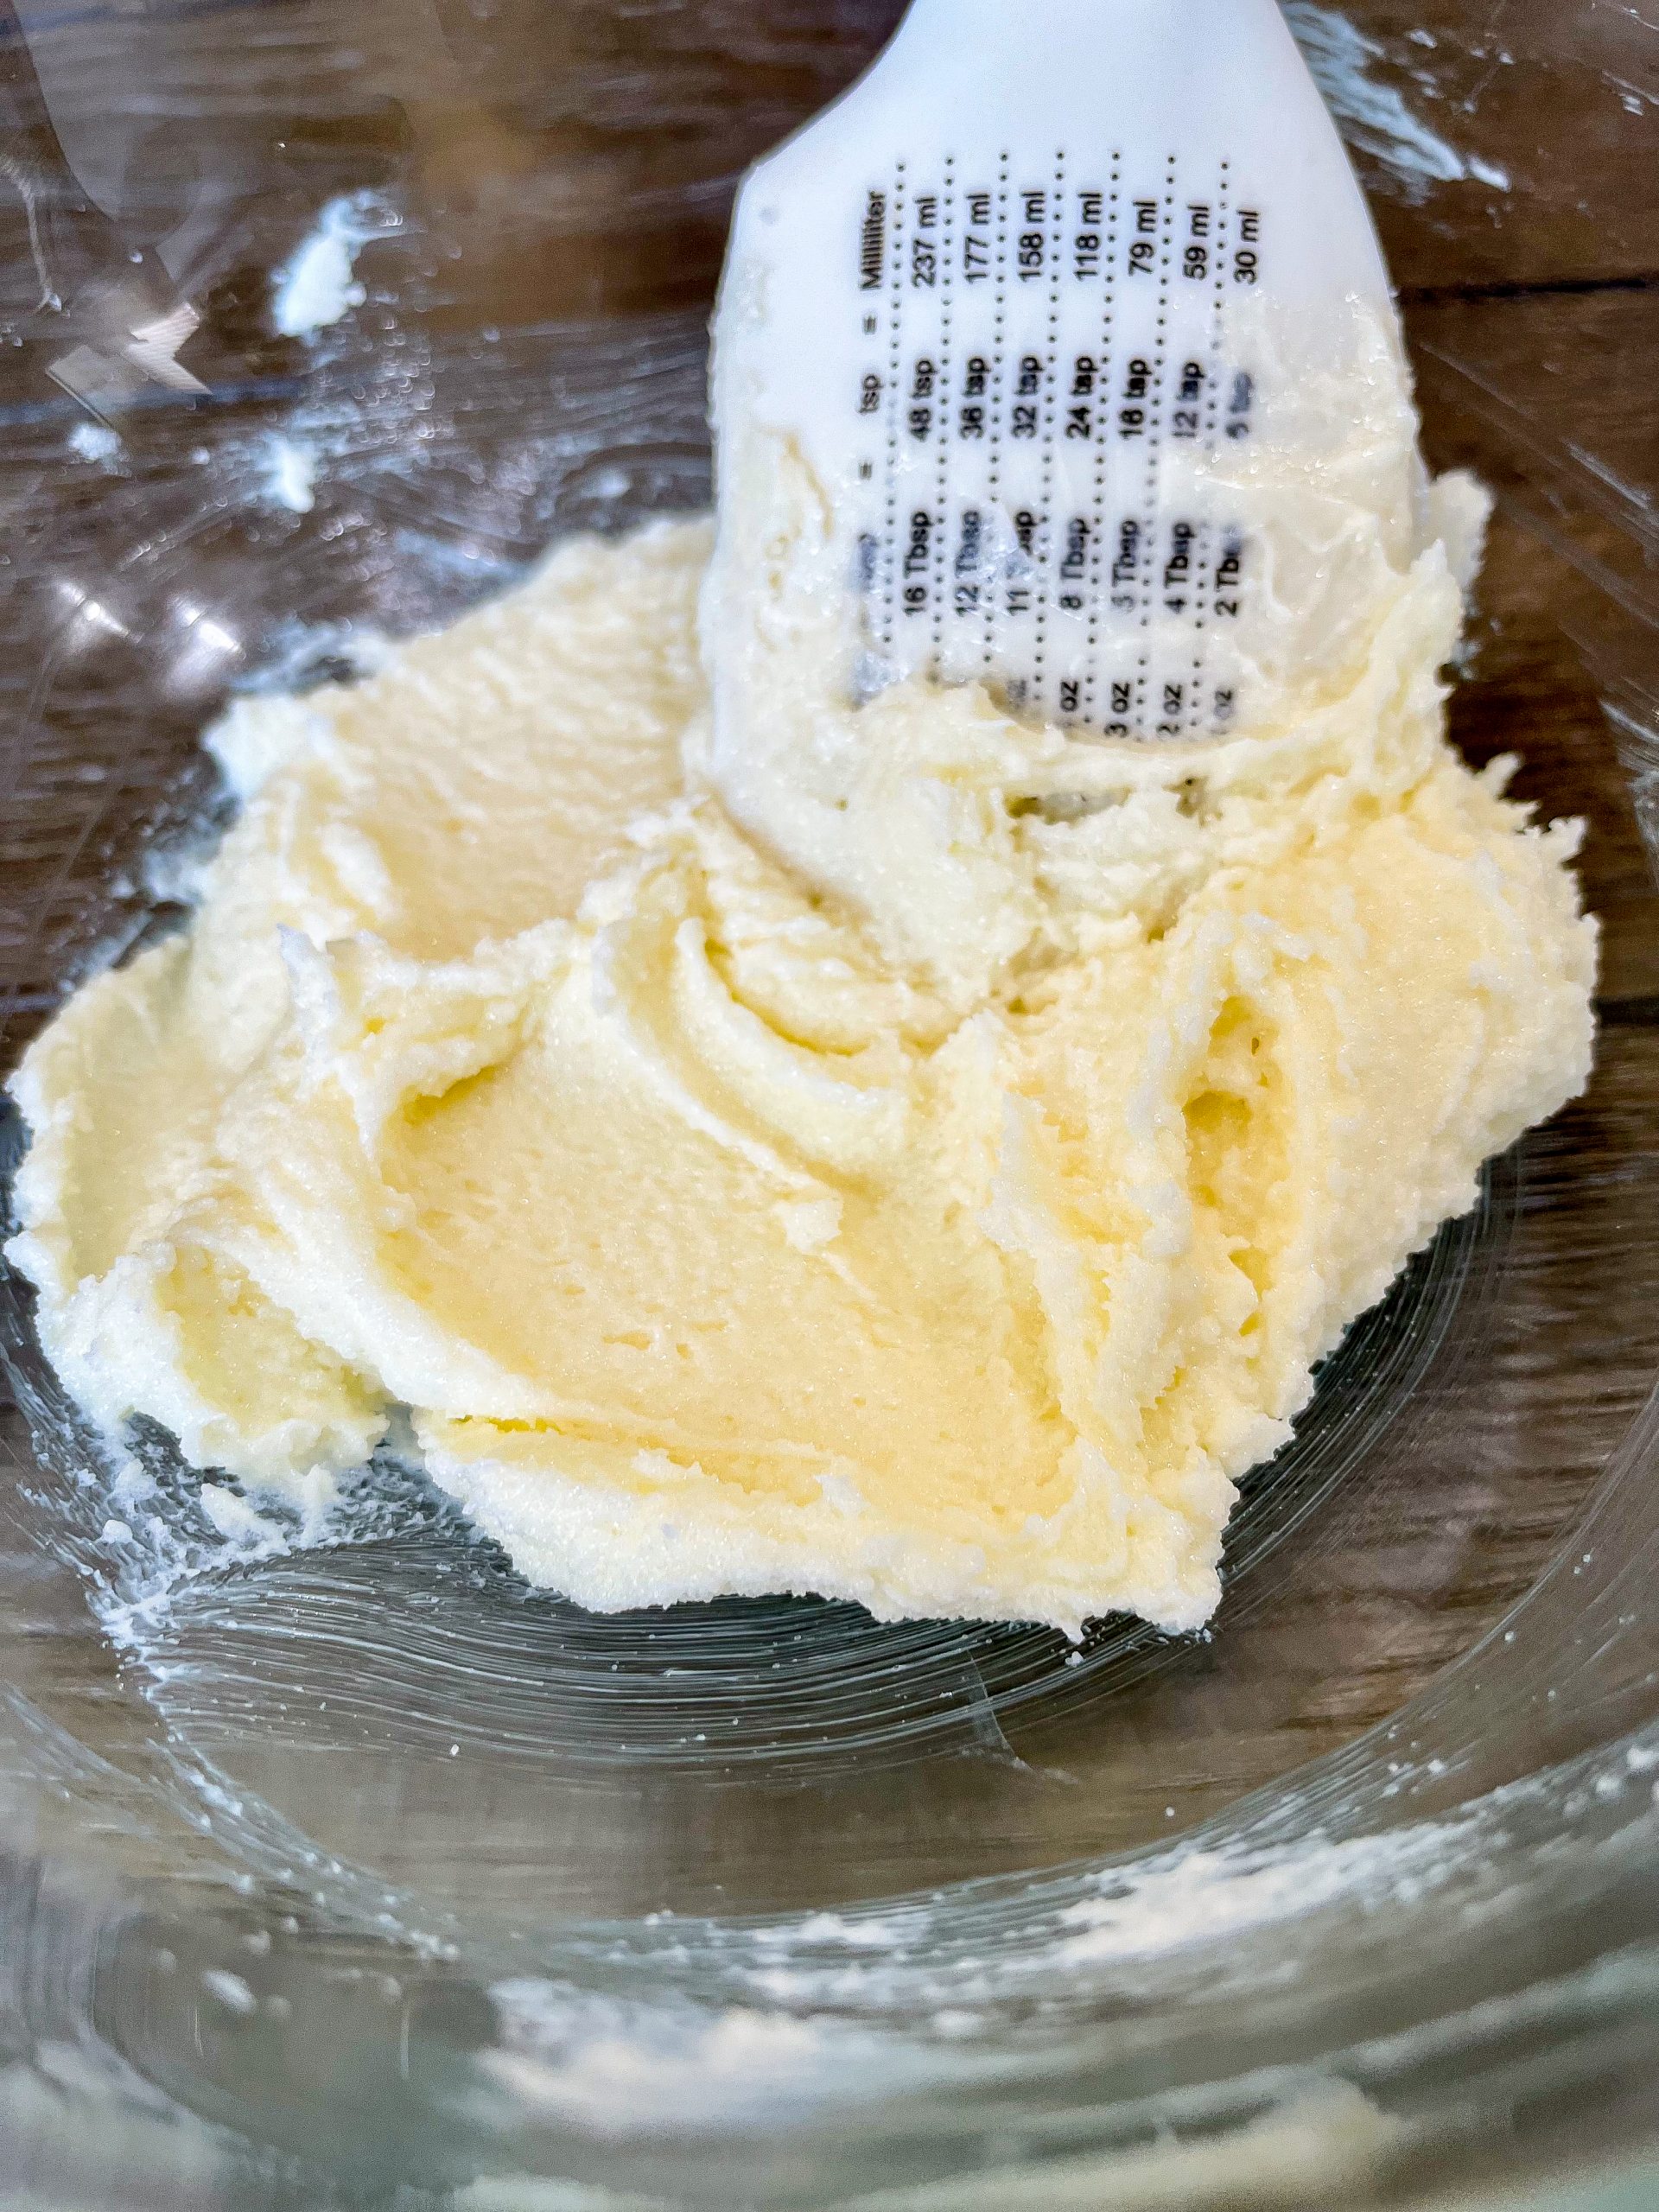 Cream together the butter and sugar in a separate bowl. 